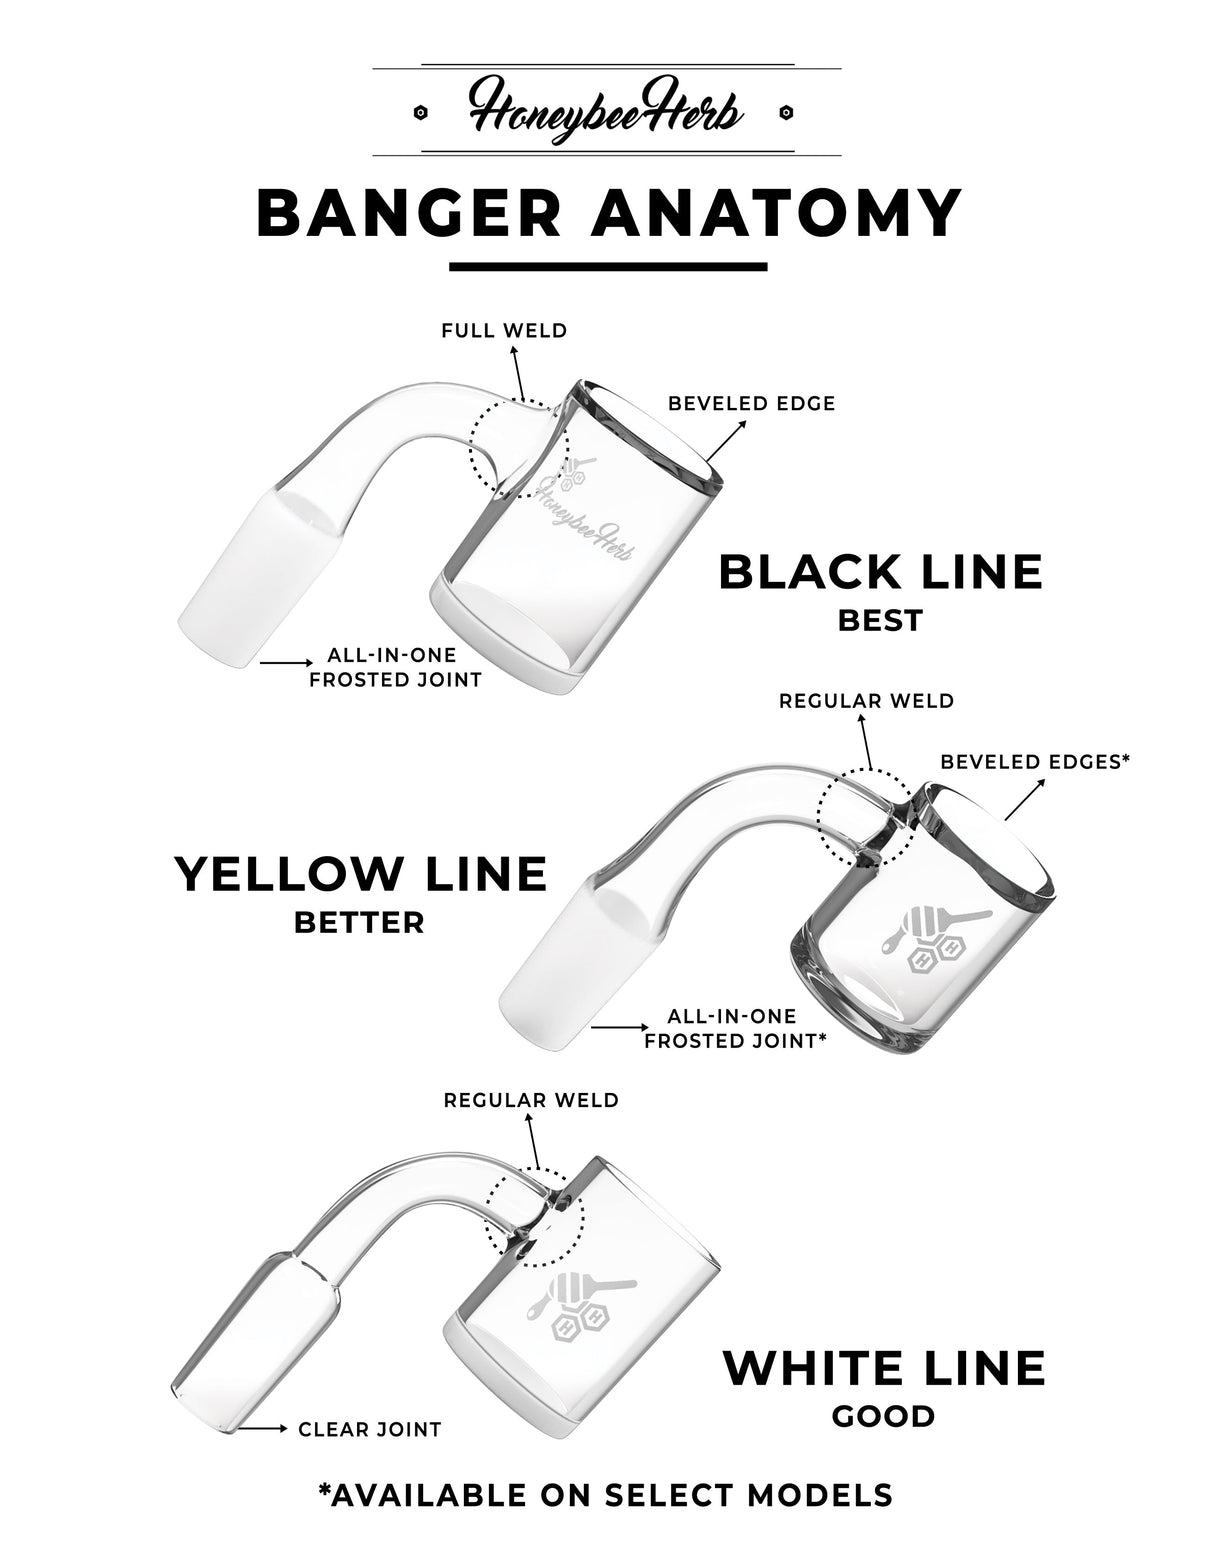 Honeybee Herb Banger Anatomy chart showing bevel whirlwind sidecar variants at 90° angle